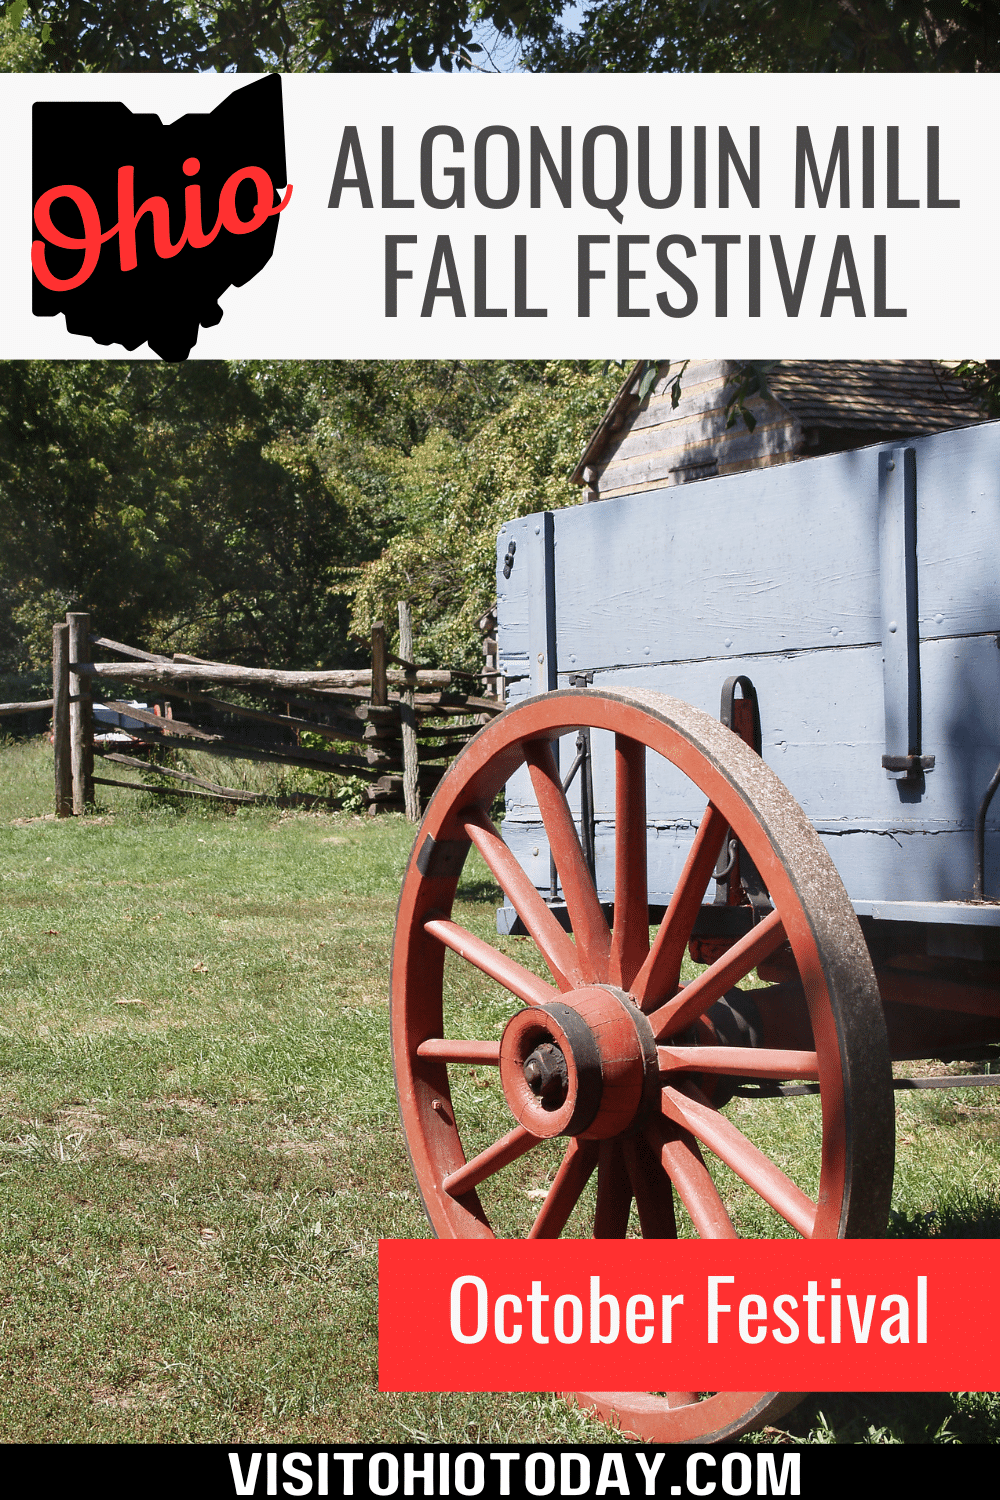 The Algonquin Mill Fall Festival is held in Carrollton on the weekend of October 13-15, 2023. This festival takes you back in time to the pioneer era of steam and stagecoaches.